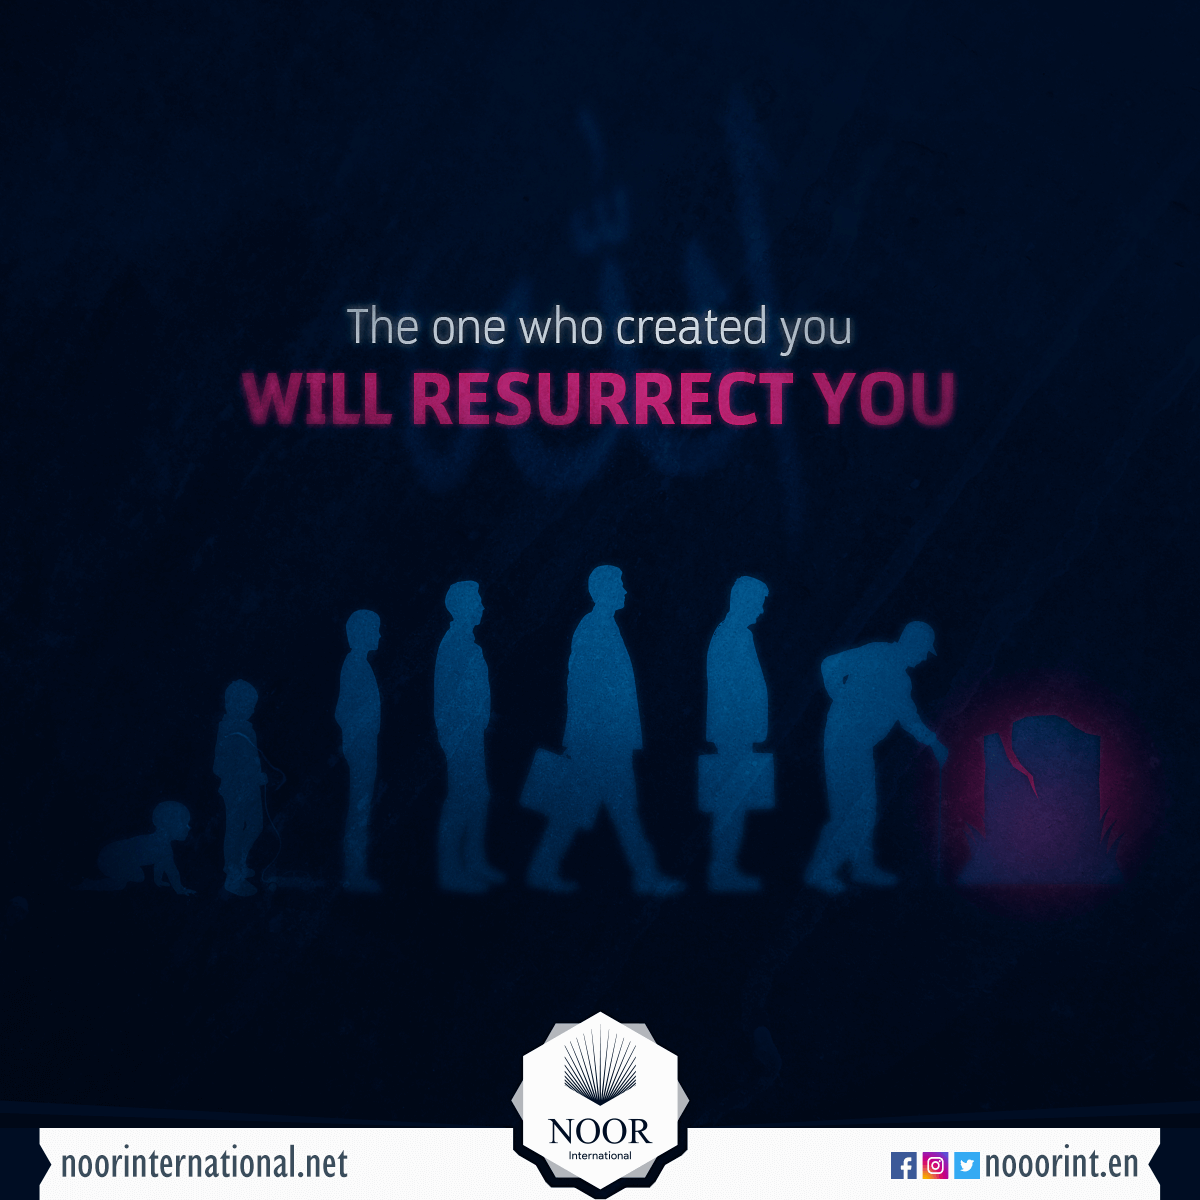 The one who created you will resurrect you